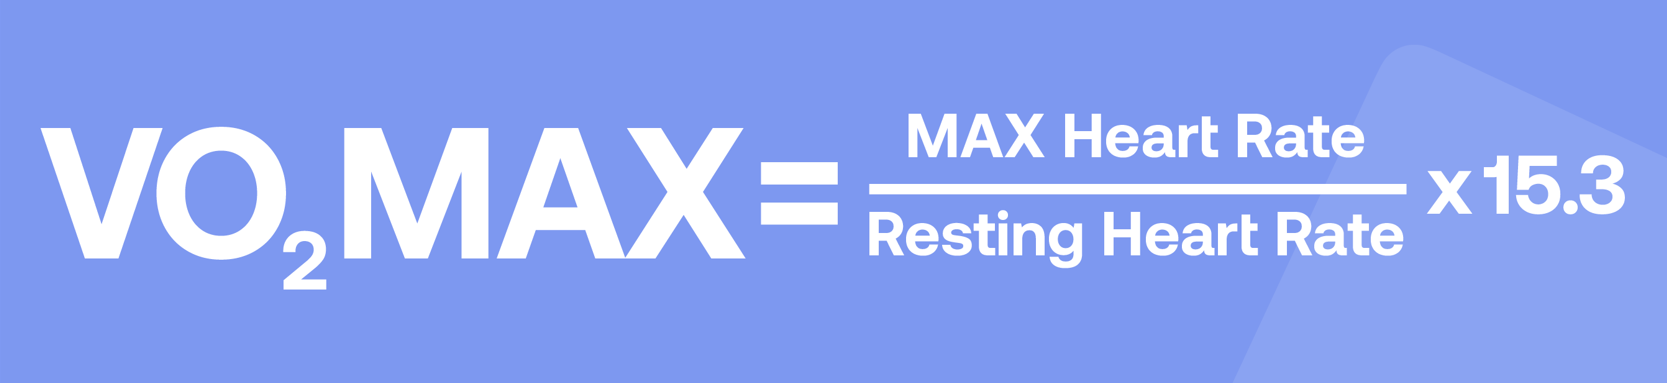 VO₂ Max = MAX Heart Rate/Resting Heart Rate x 15.3